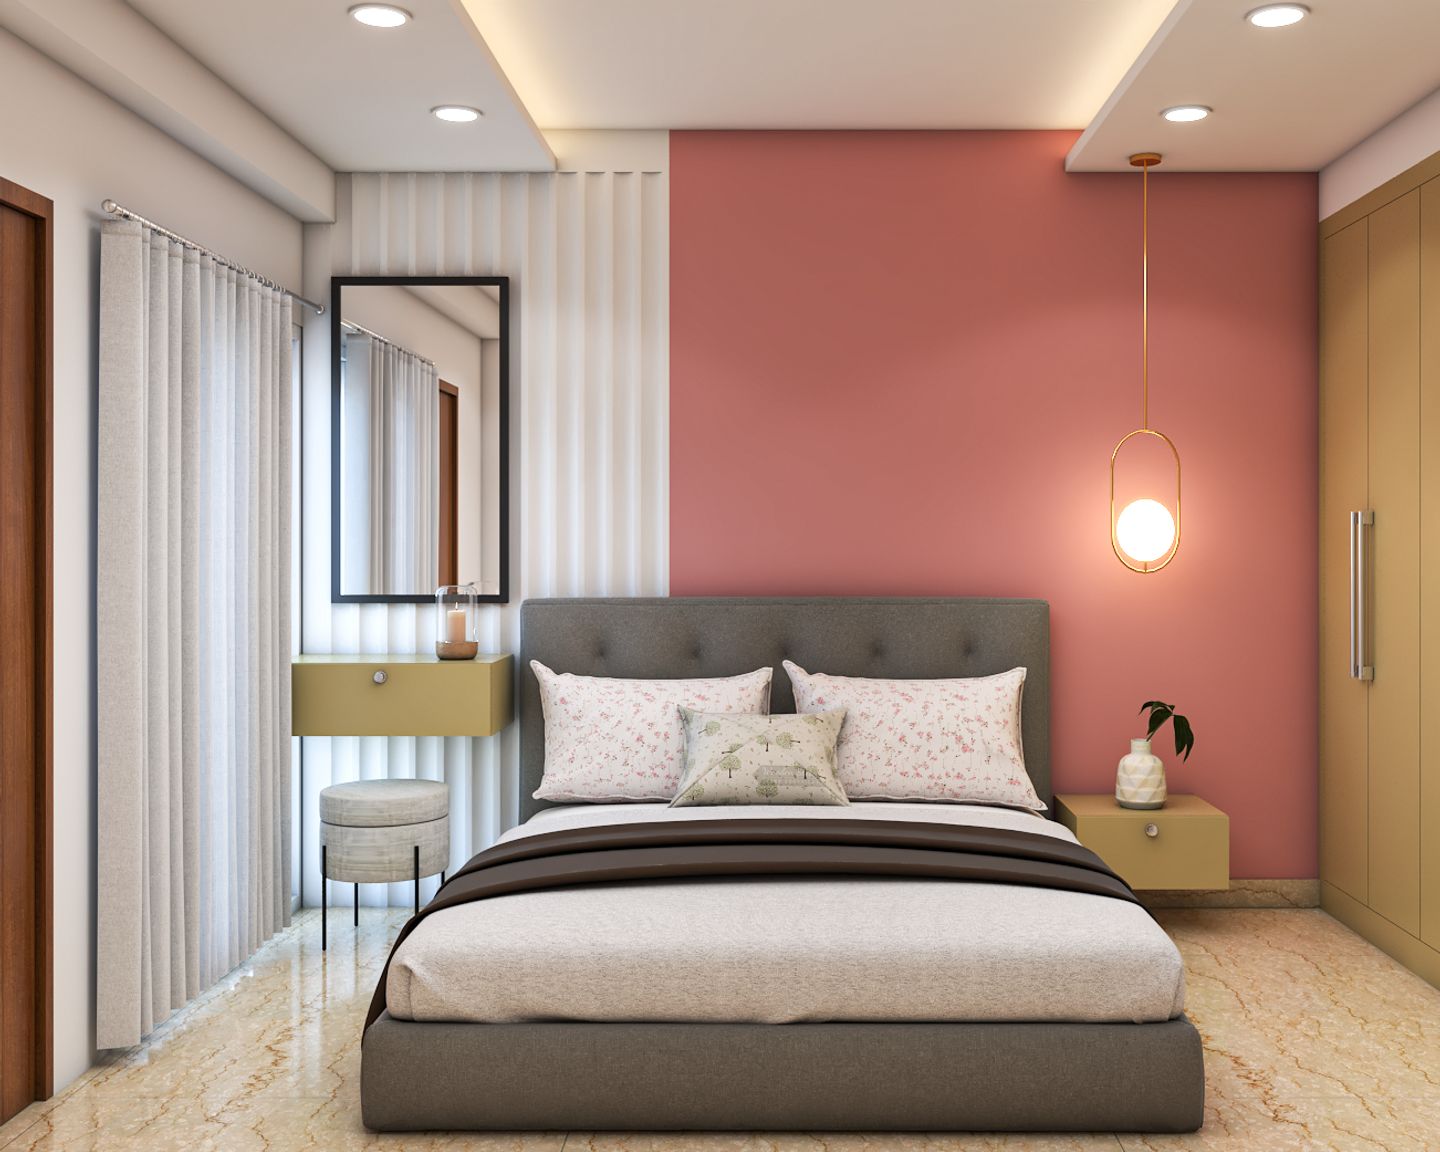 Easy To Maintain Modern Kids Bedroom With Pink Interiors - Livspace